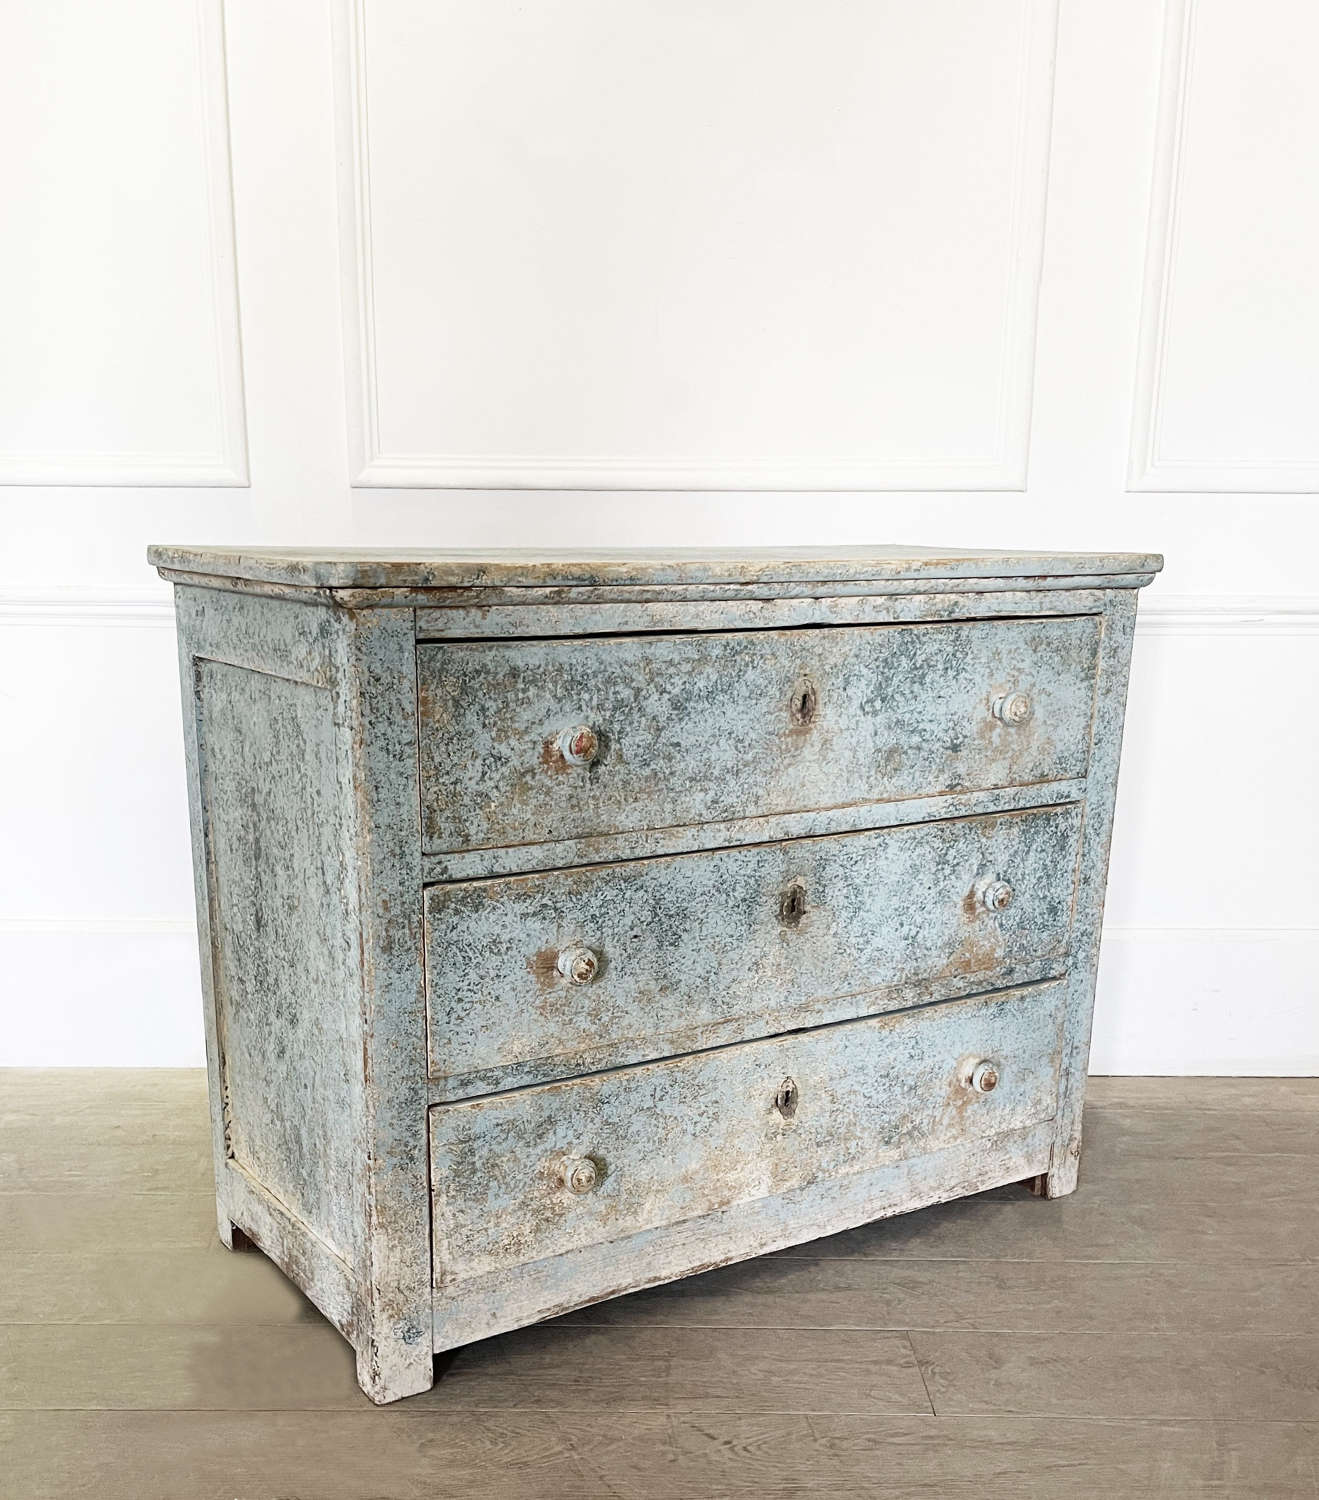 Small early 19th century French Commode - circa 1830